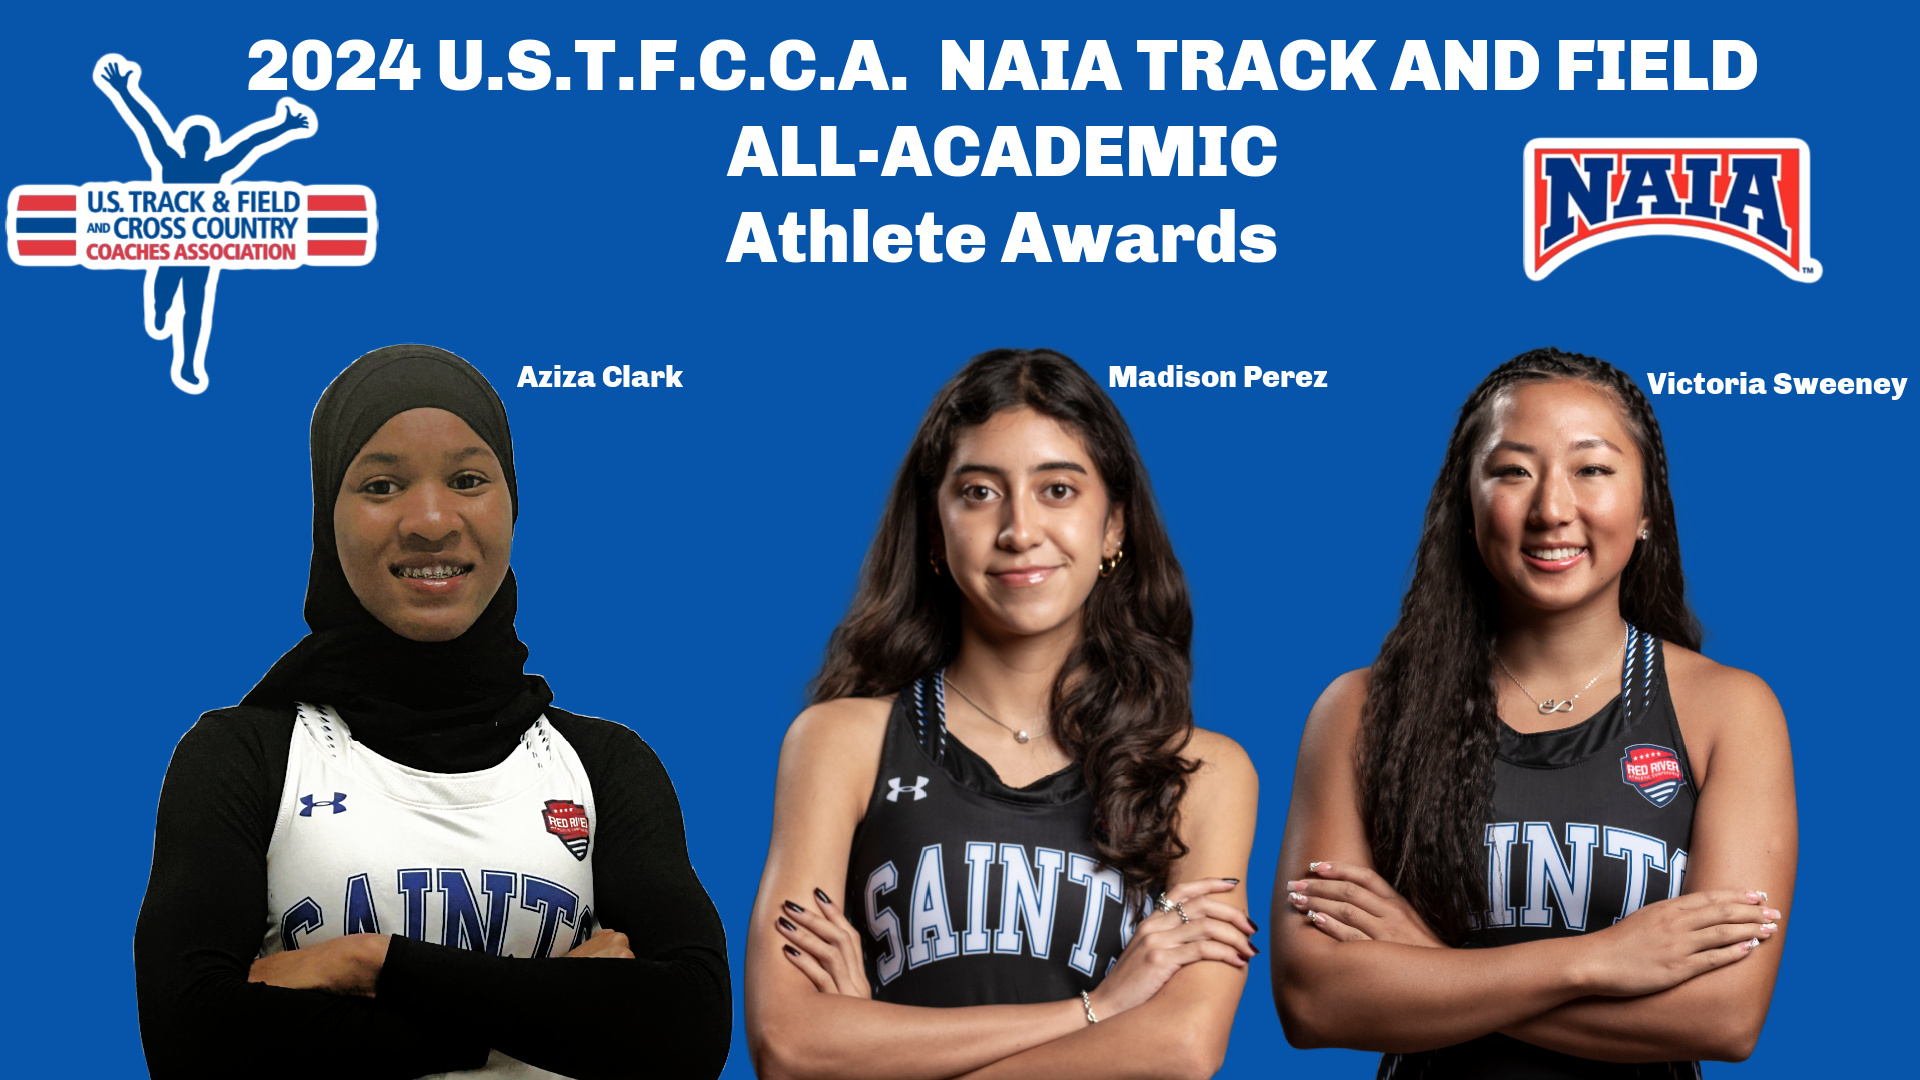 Three Track and Field Women Earn All-Academic Awards